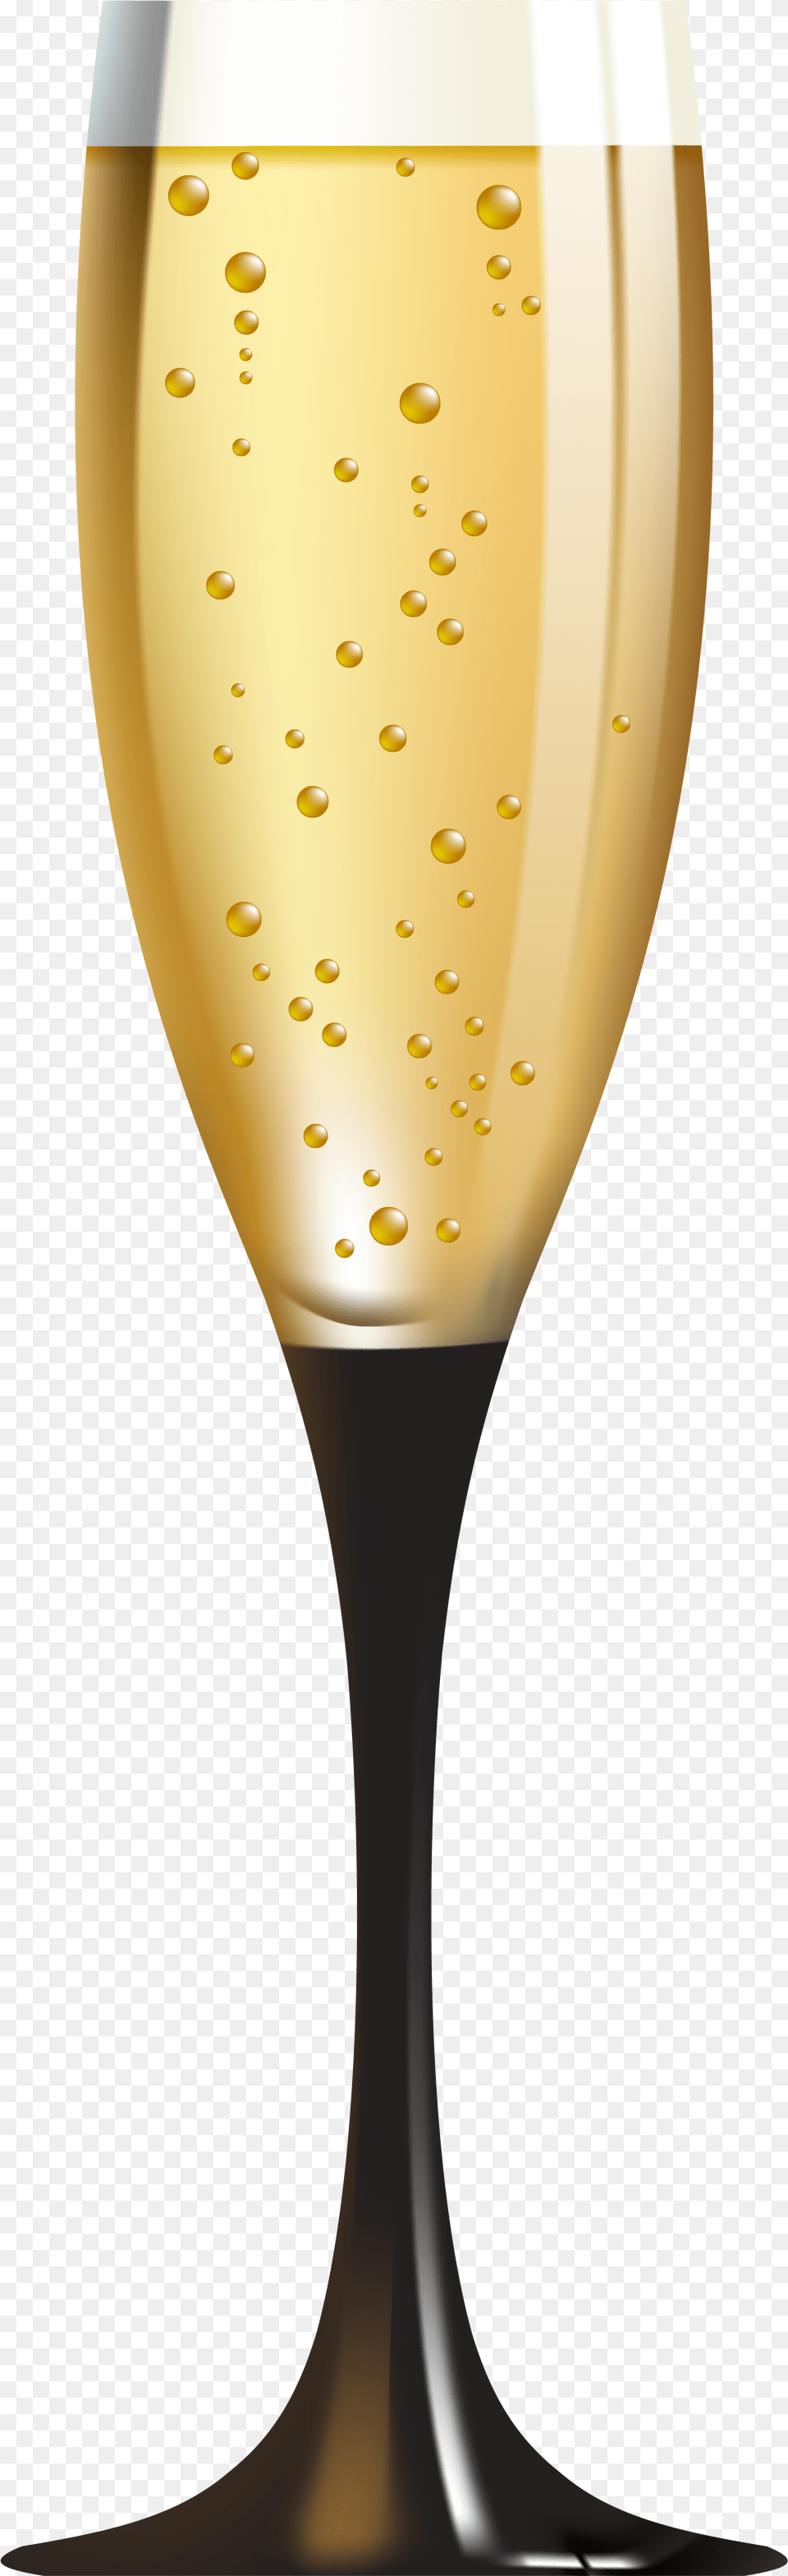 Cocktail Clipart Champagne Glass Glass Of Champagne Clipart, Alcohol, Beverage, Liquor, Wine Png